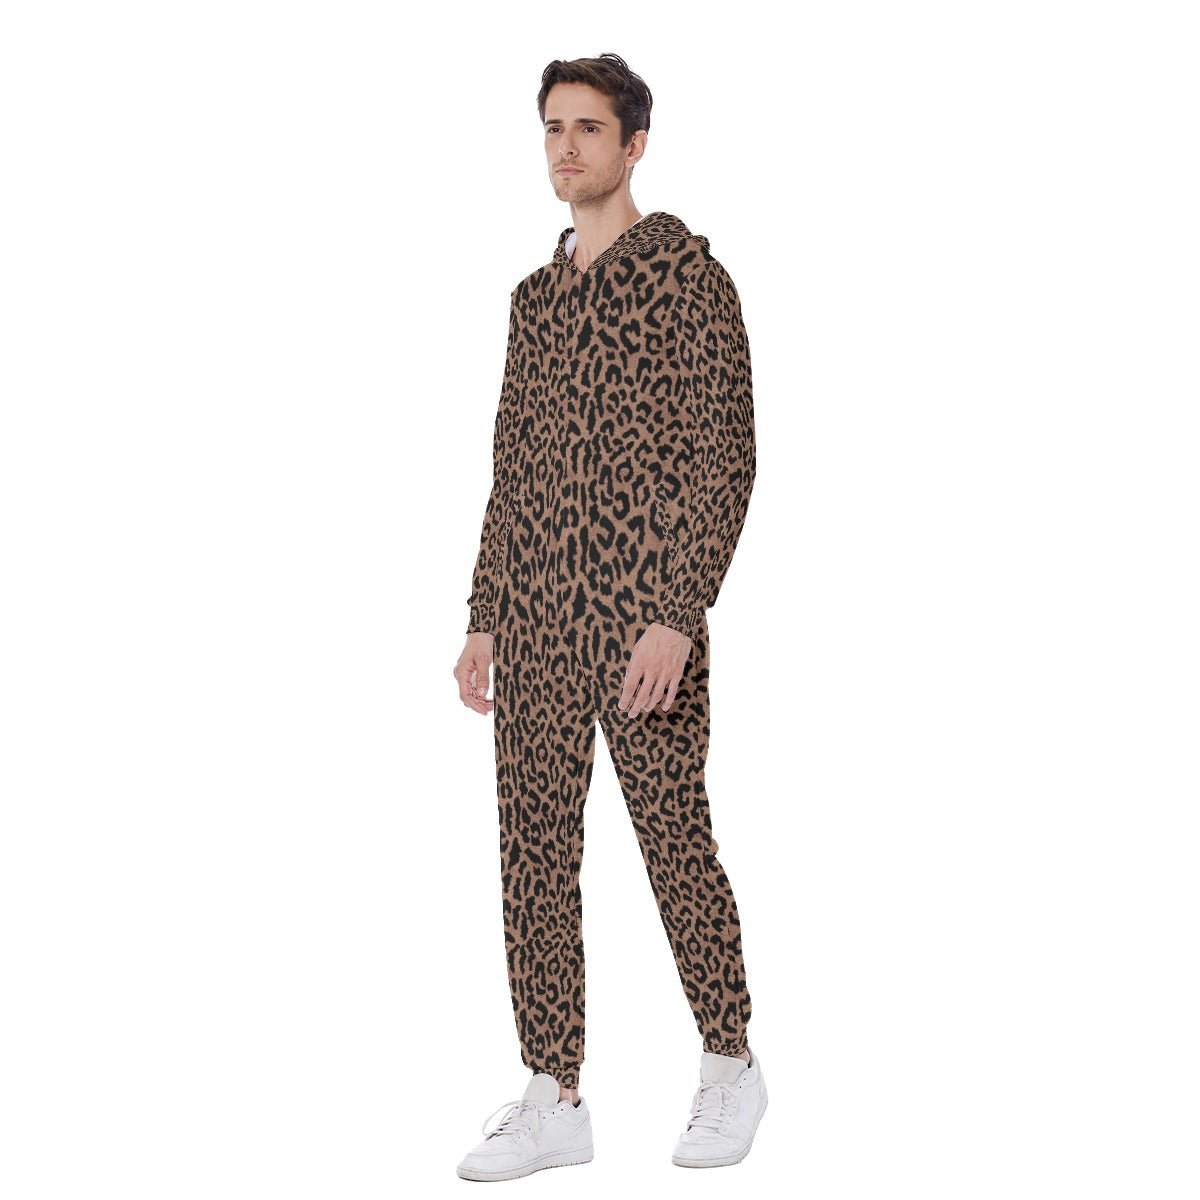 DQM - Leopard Pattern Hooded Jumpsuit - dragqueenmerch